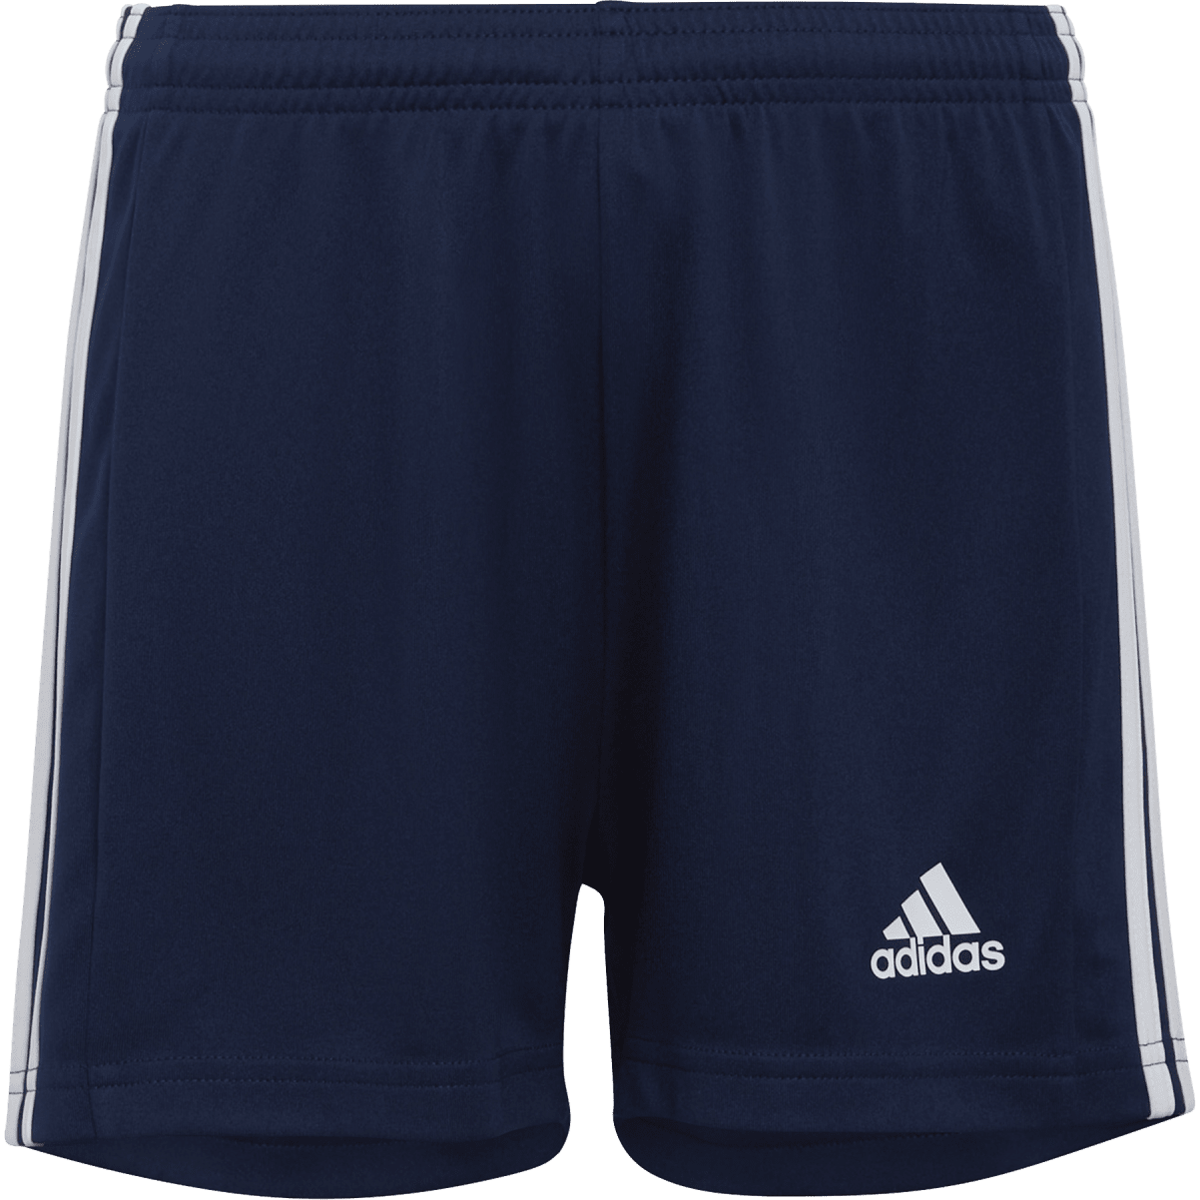  Soccer Referee Shorts (Premium, Youth Large) Black : Sports &  Outdoors